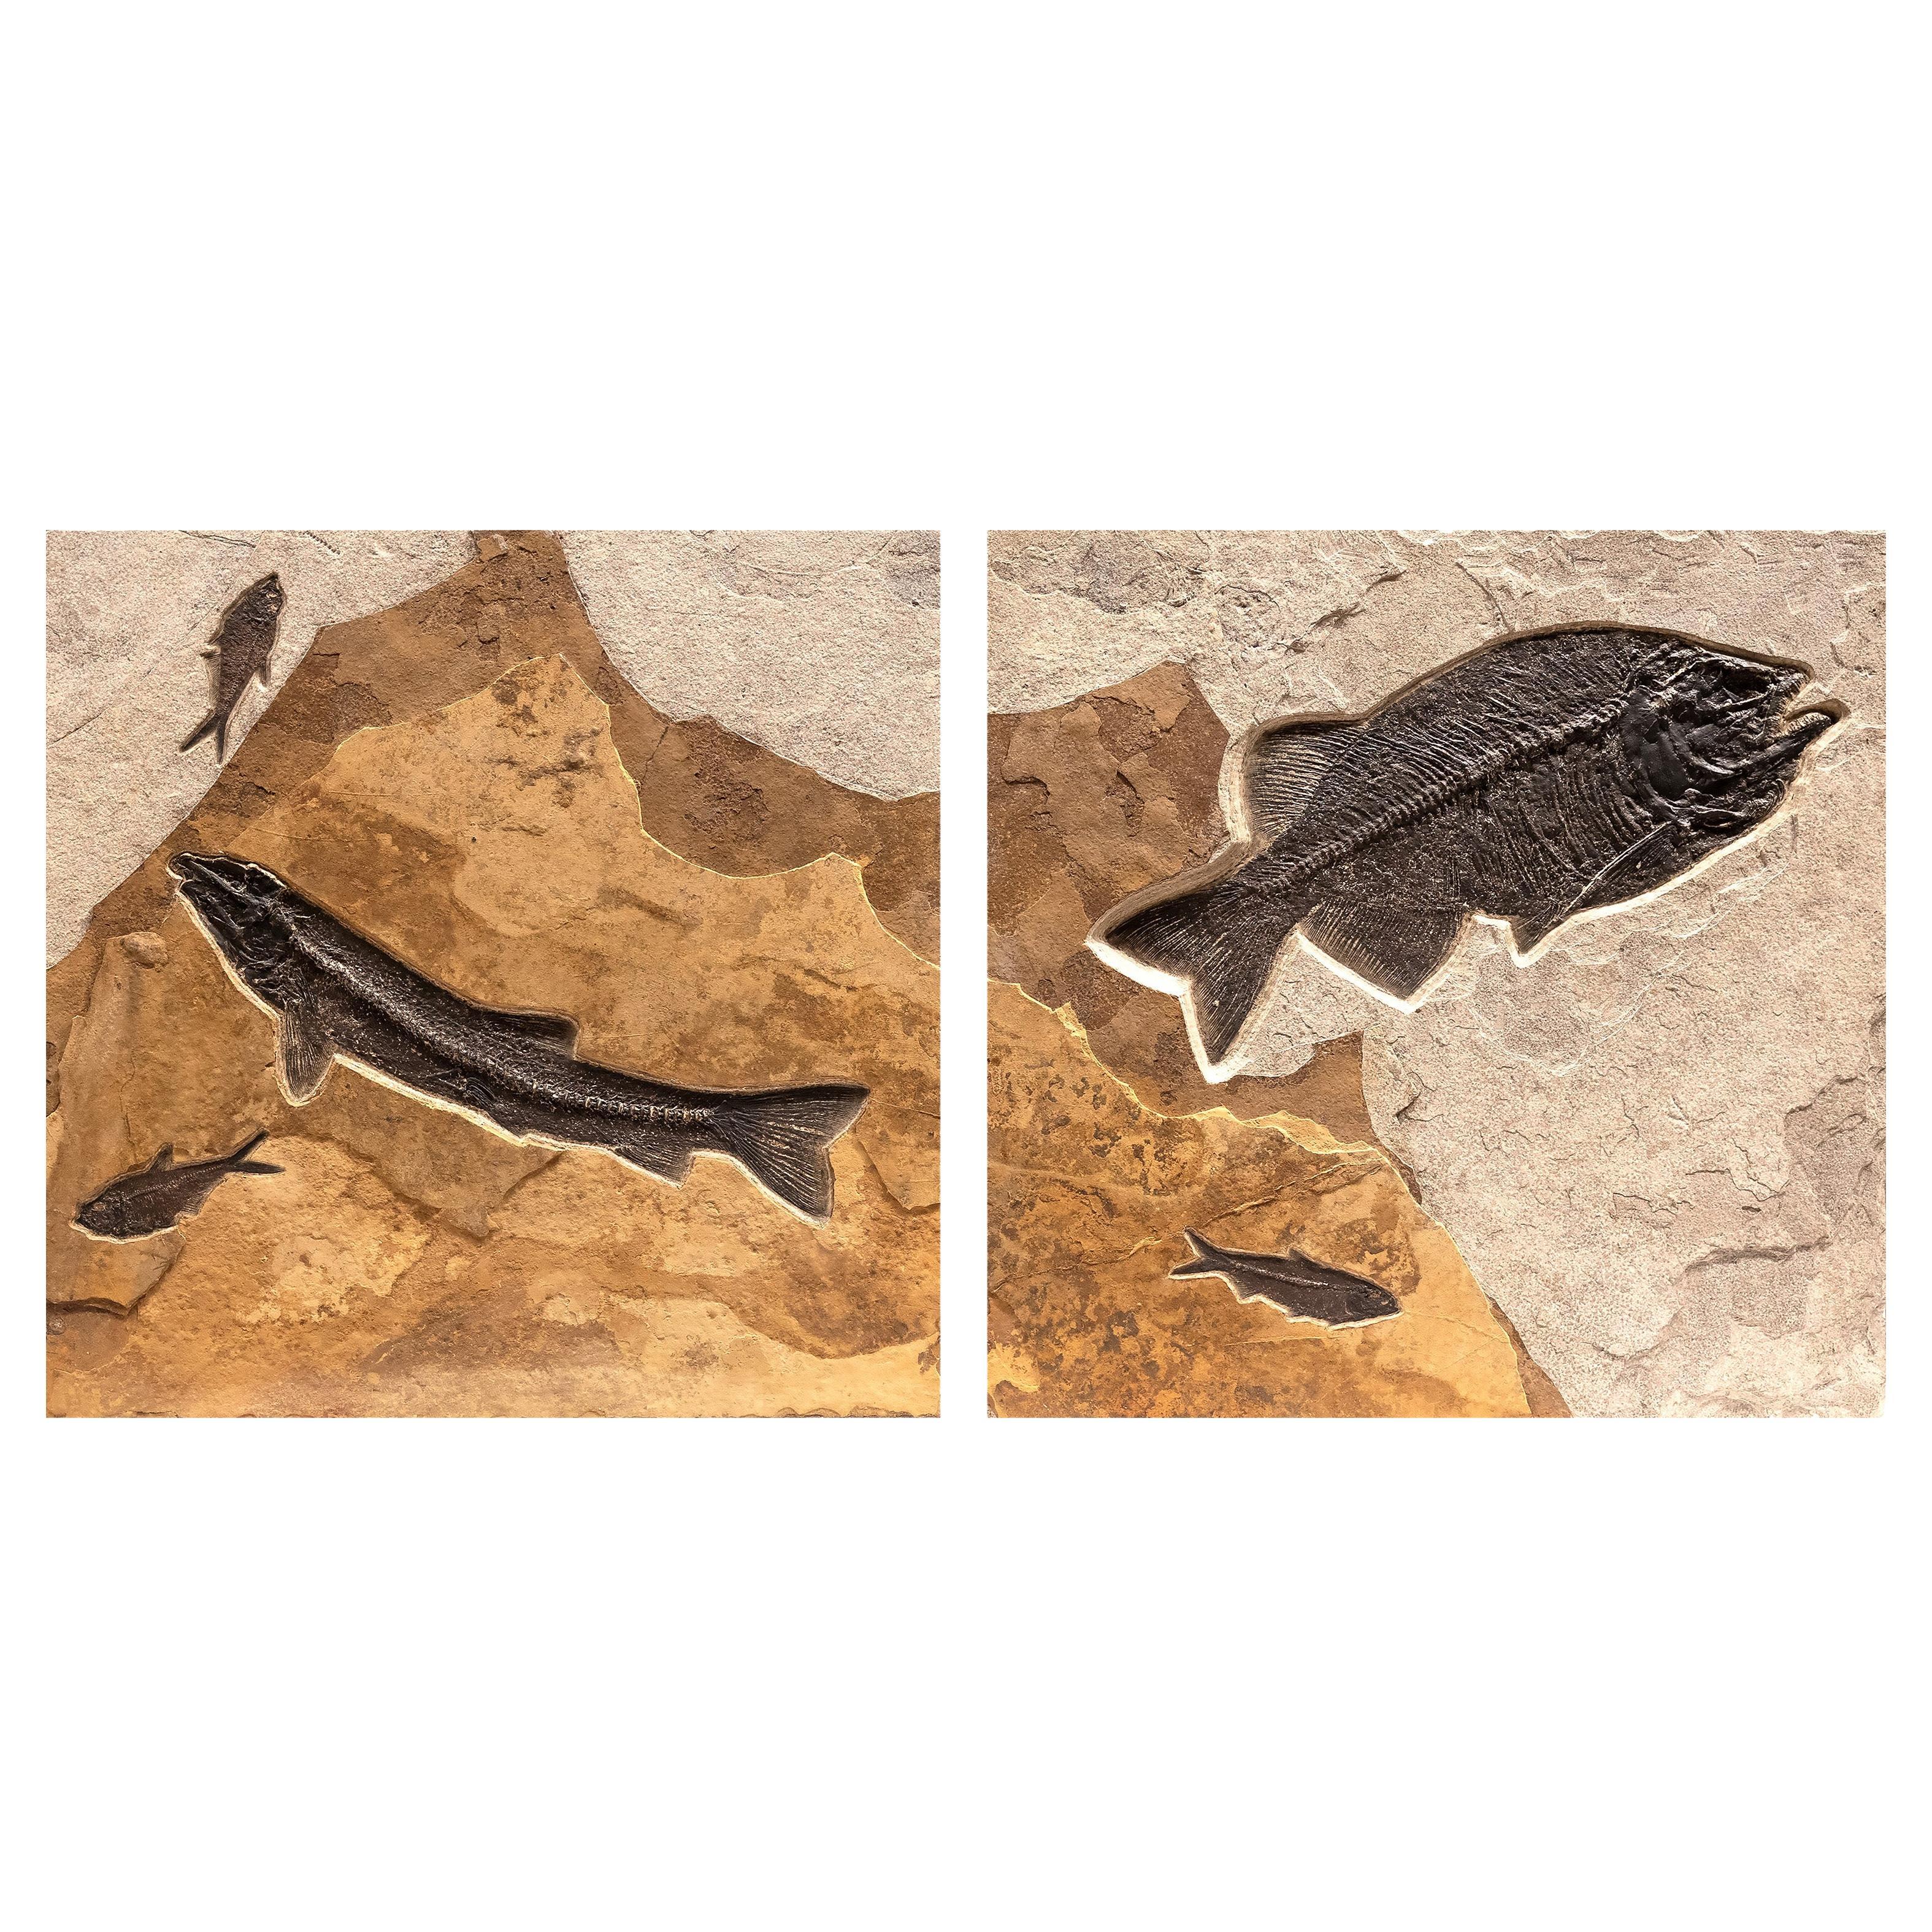 50 Million Year Old Eocene Fossil Fish Diptych, Green River Formation, Wyoming